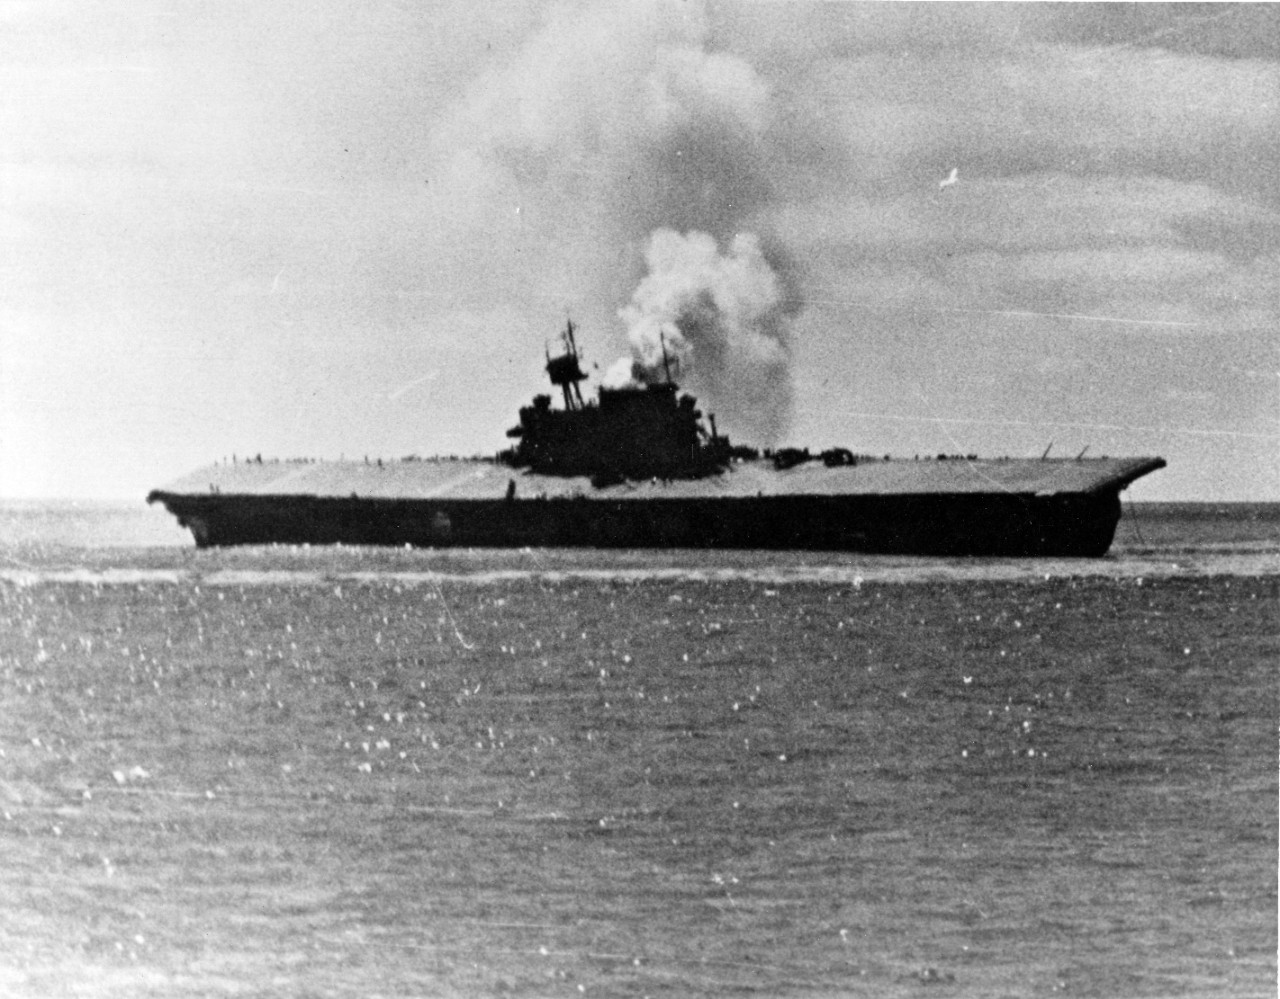 Photo #: 80-G-17062  Battle of Midway, June 1942